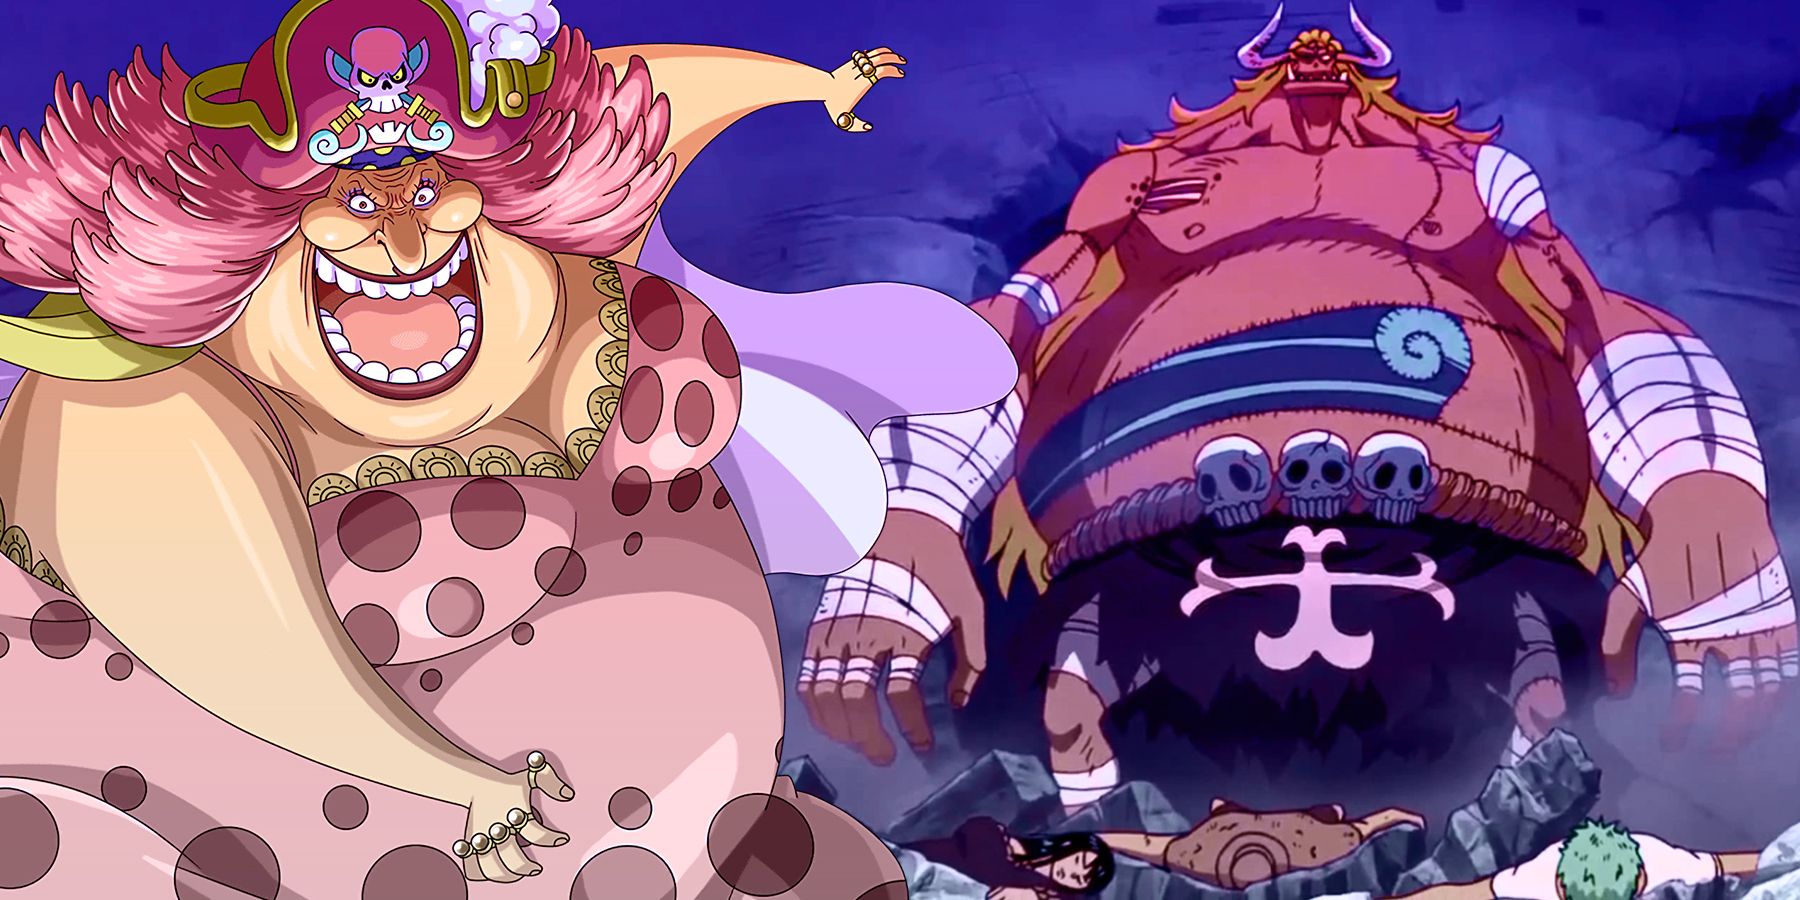 Who is Zunesha in One Piece?